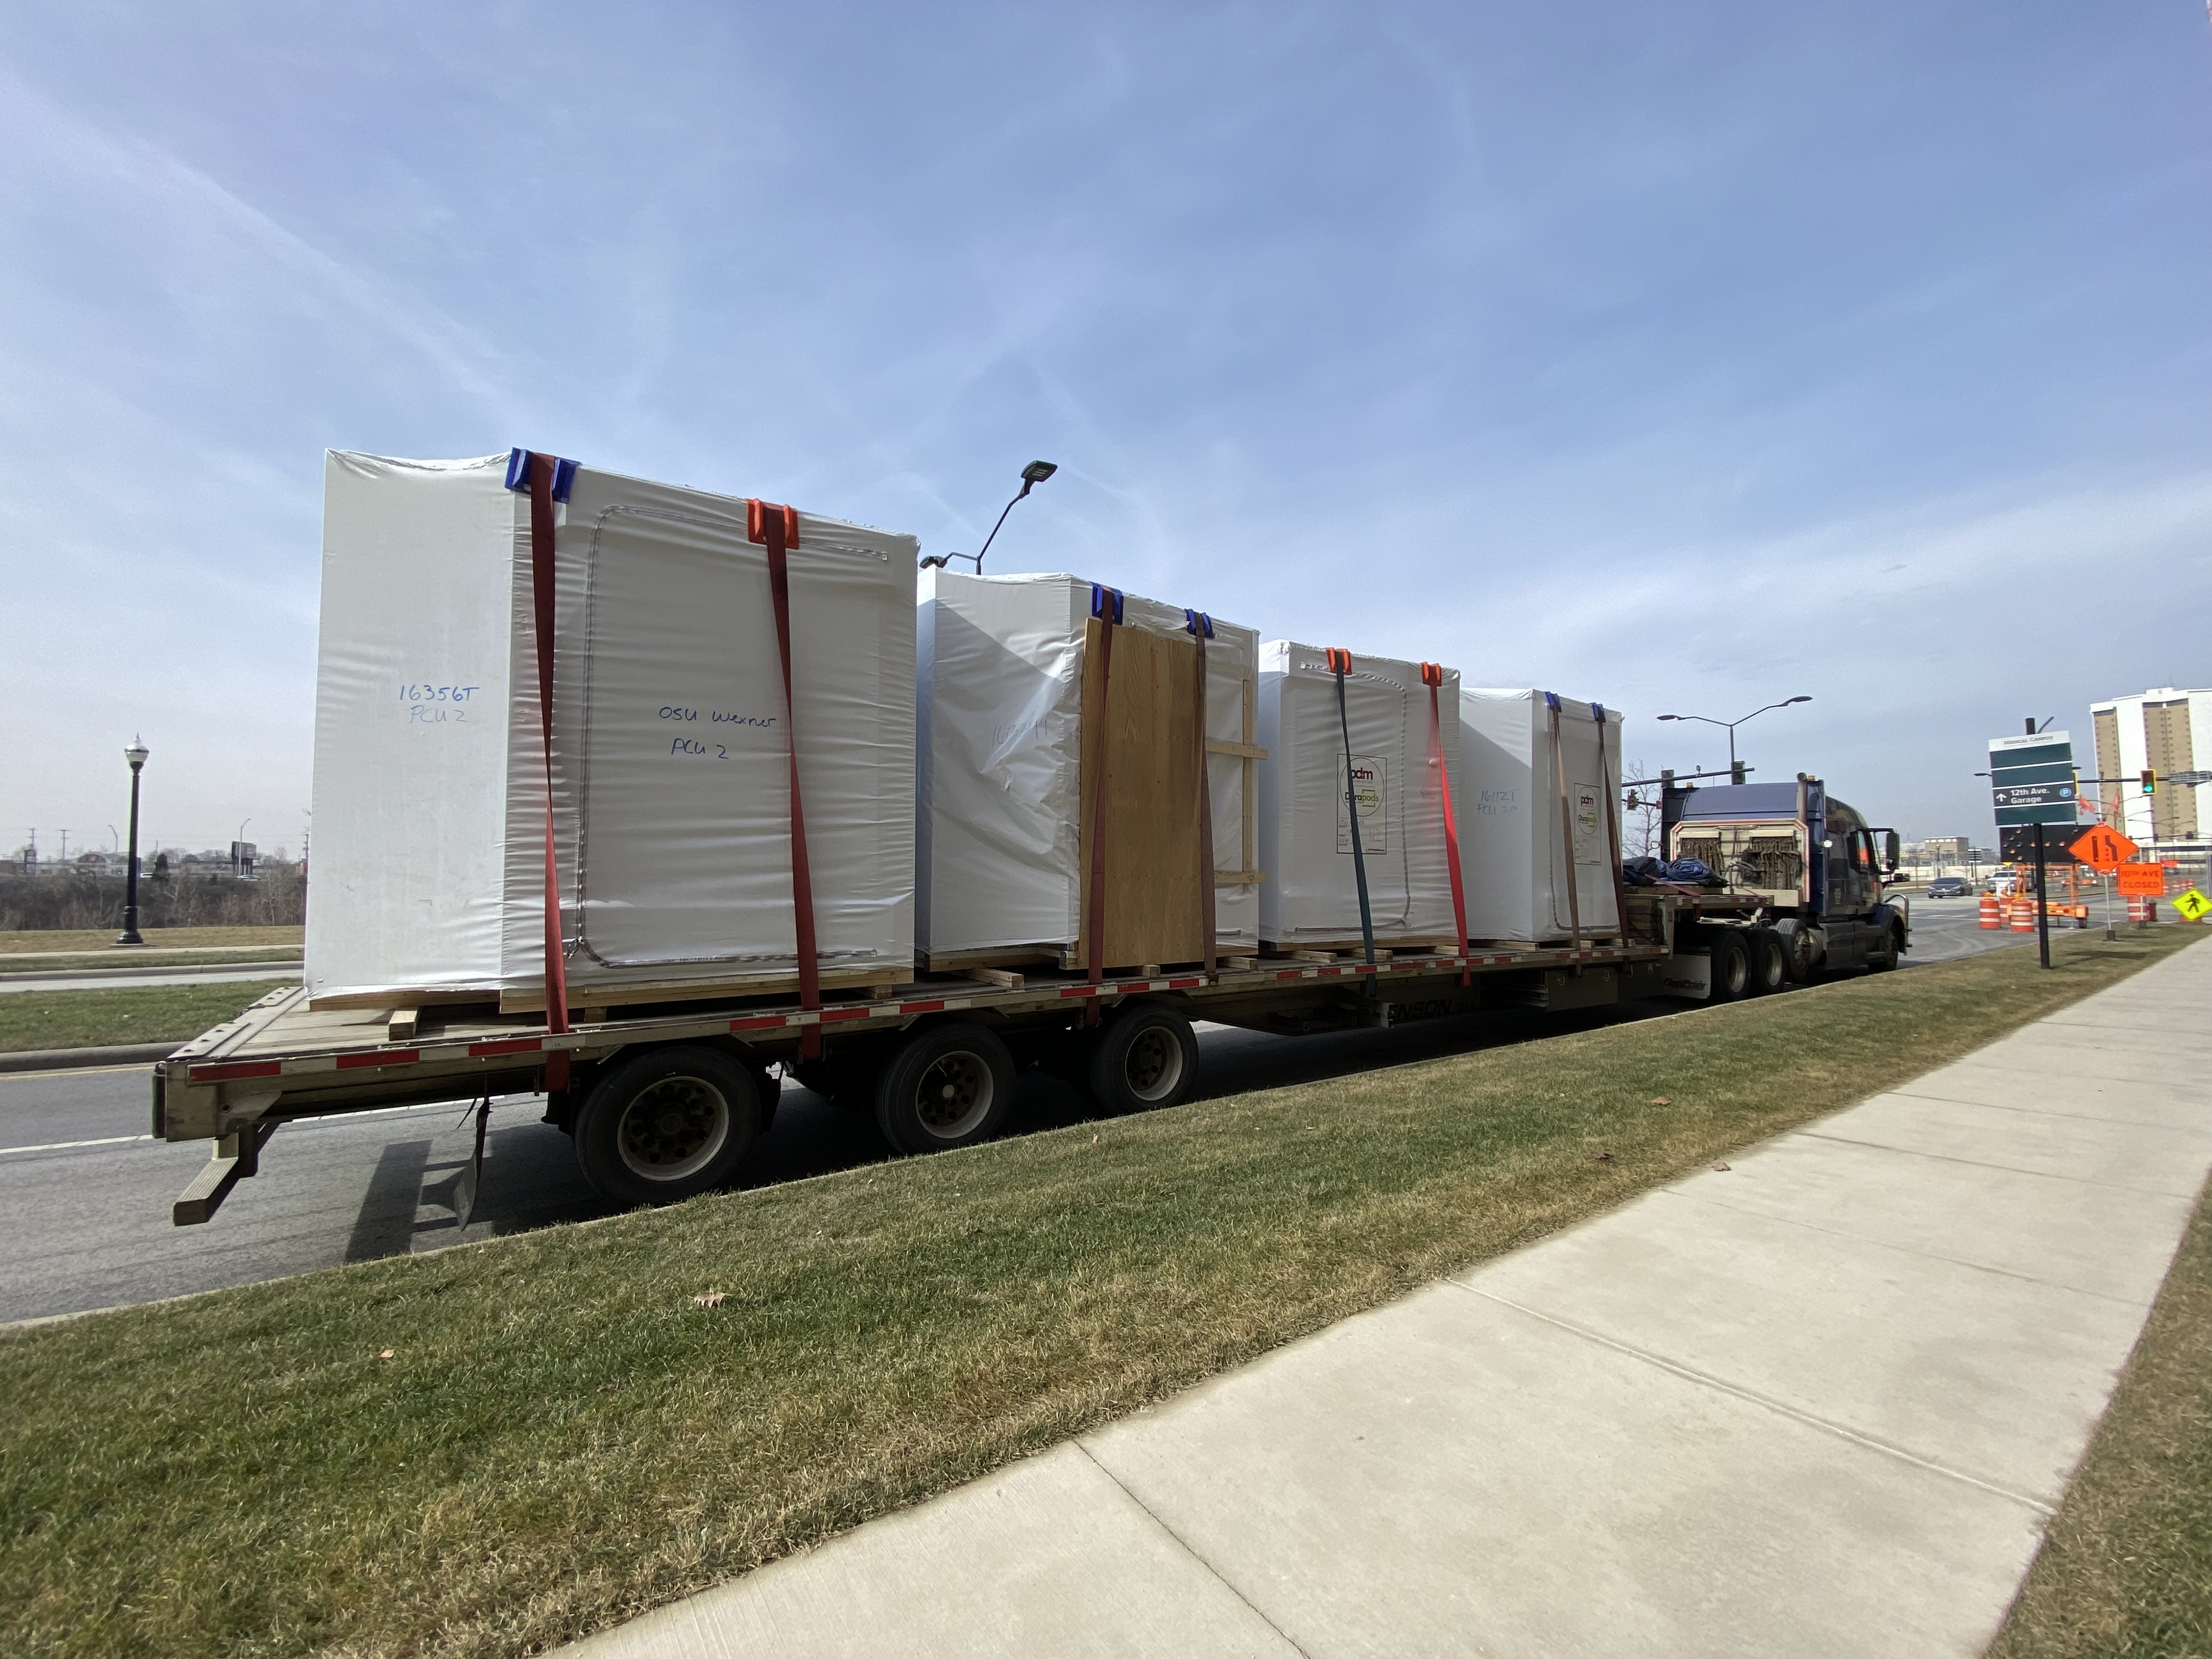 Prefabricated patient toilet rooms arriving at the OSU Tower construction site